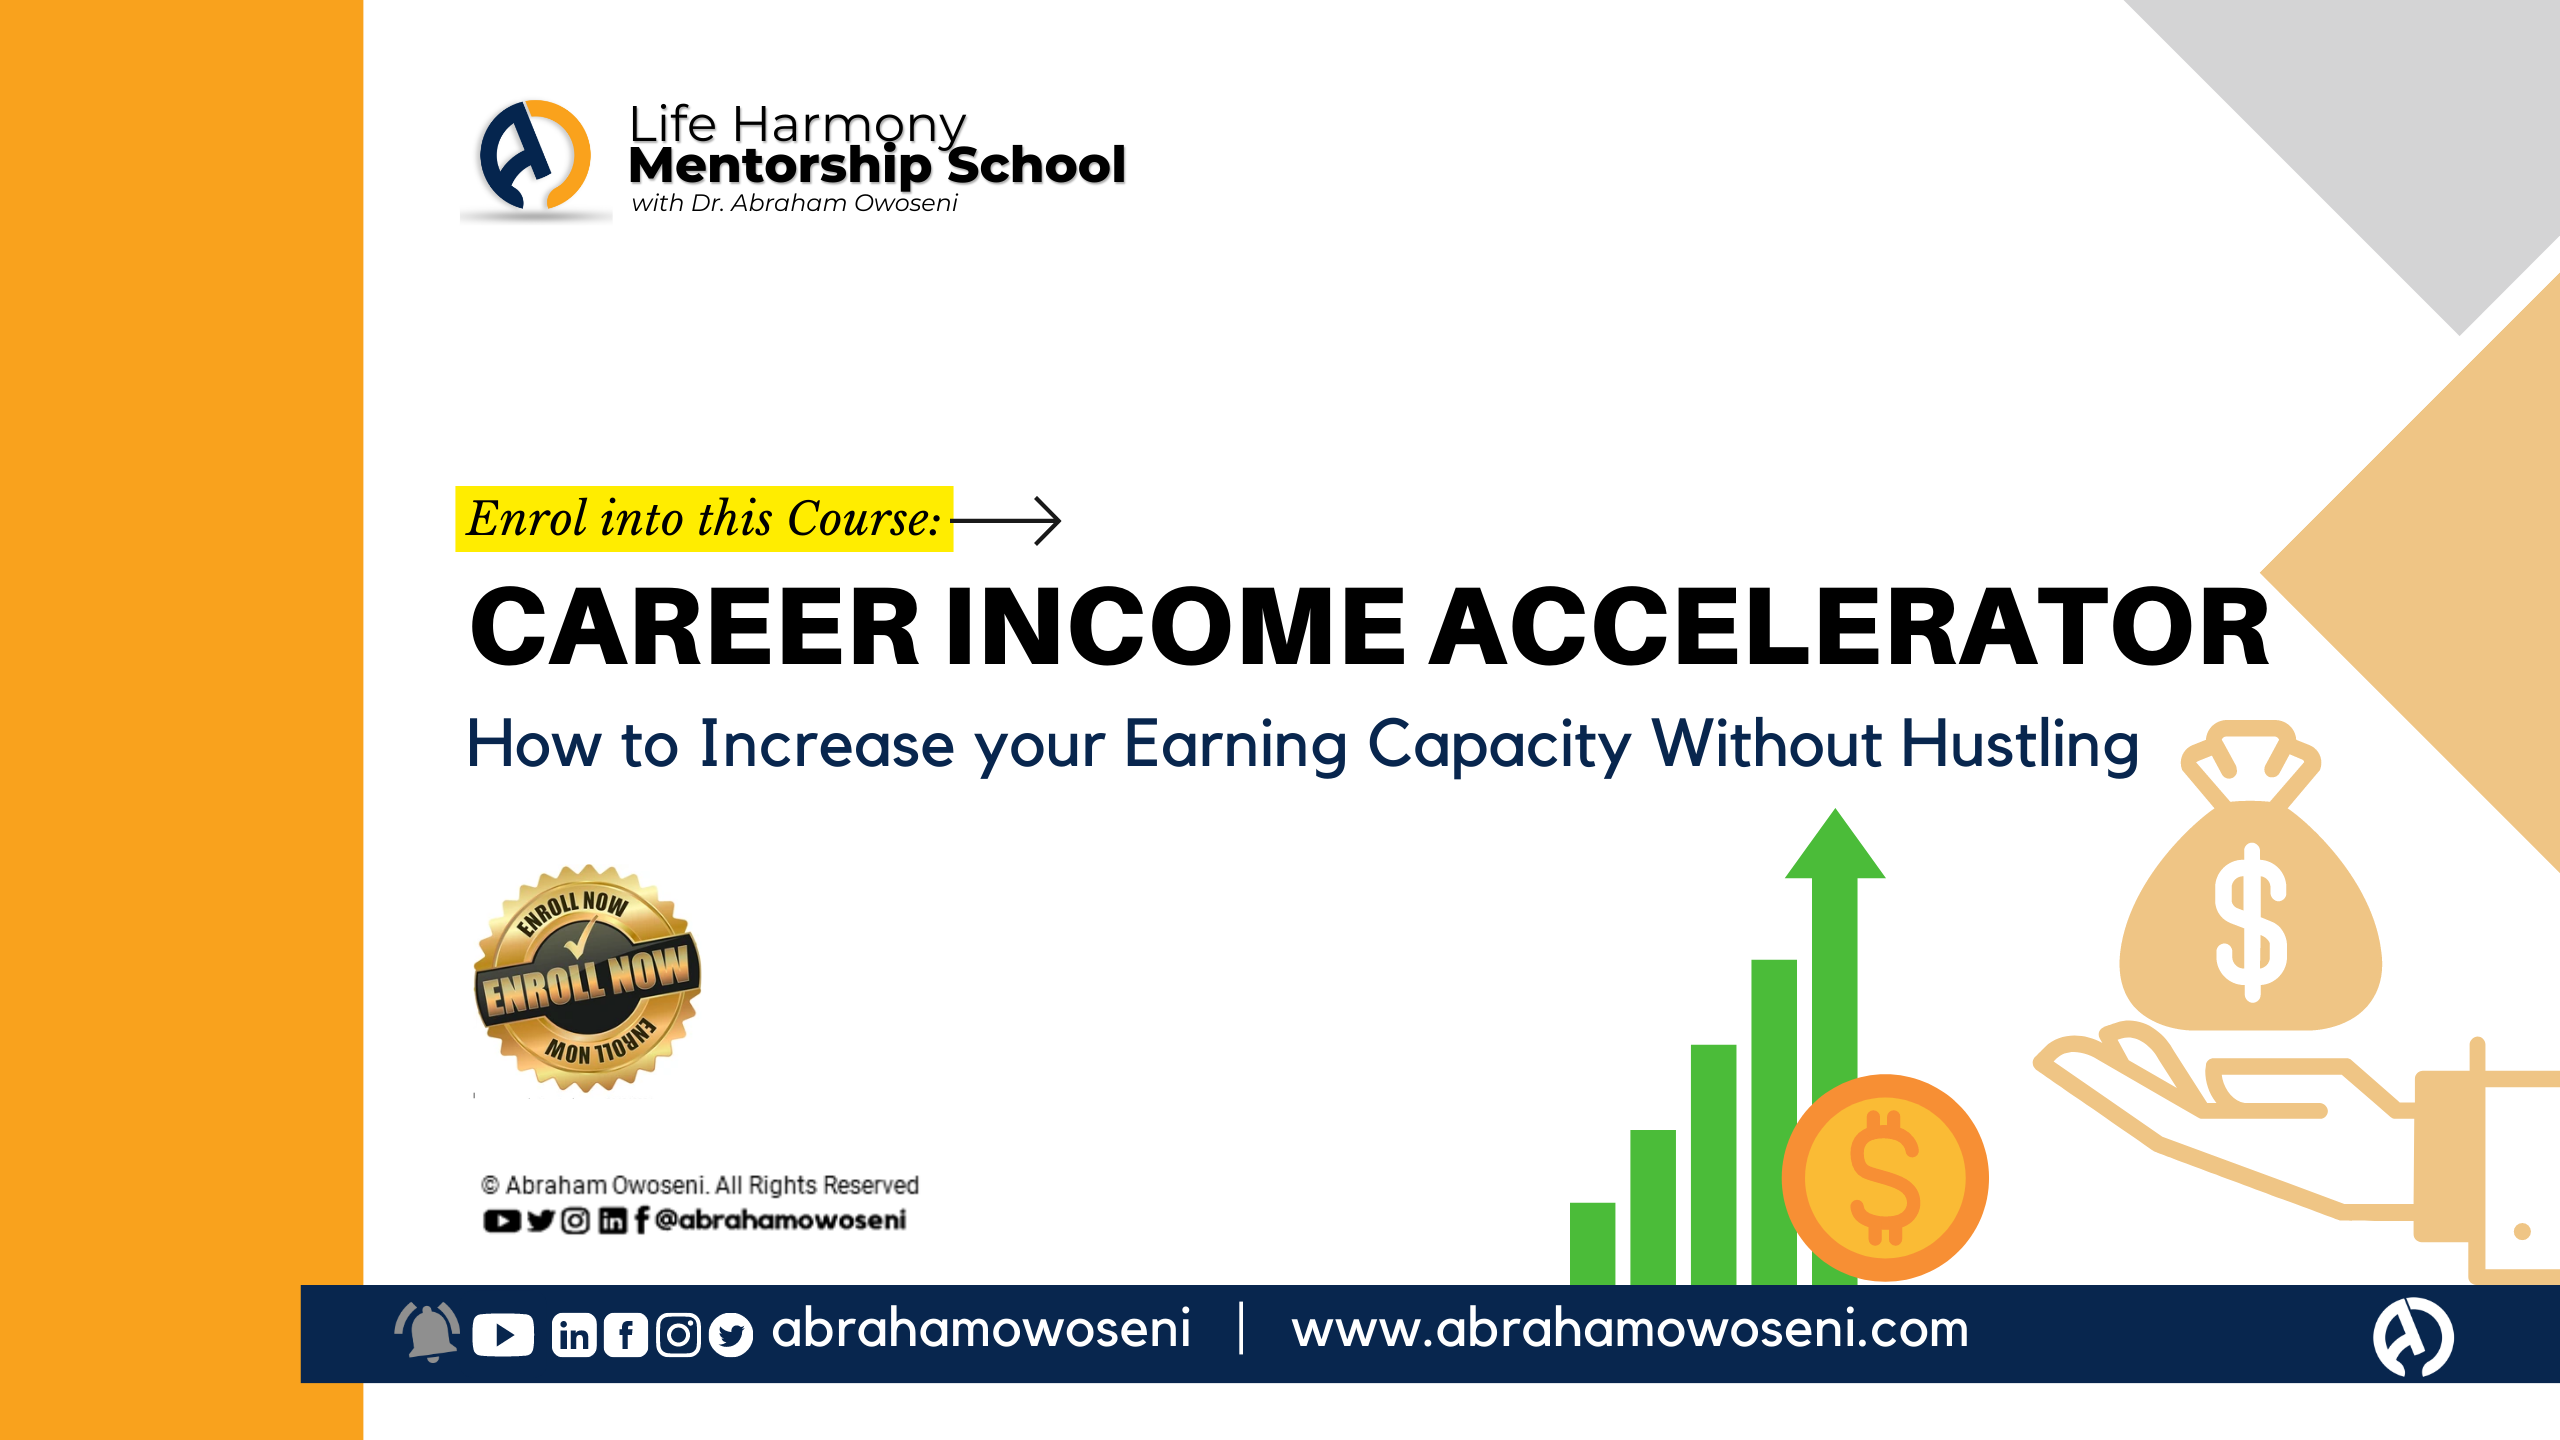 Career Income Accelerator: Increasing your Earning Capacity Without Hustling